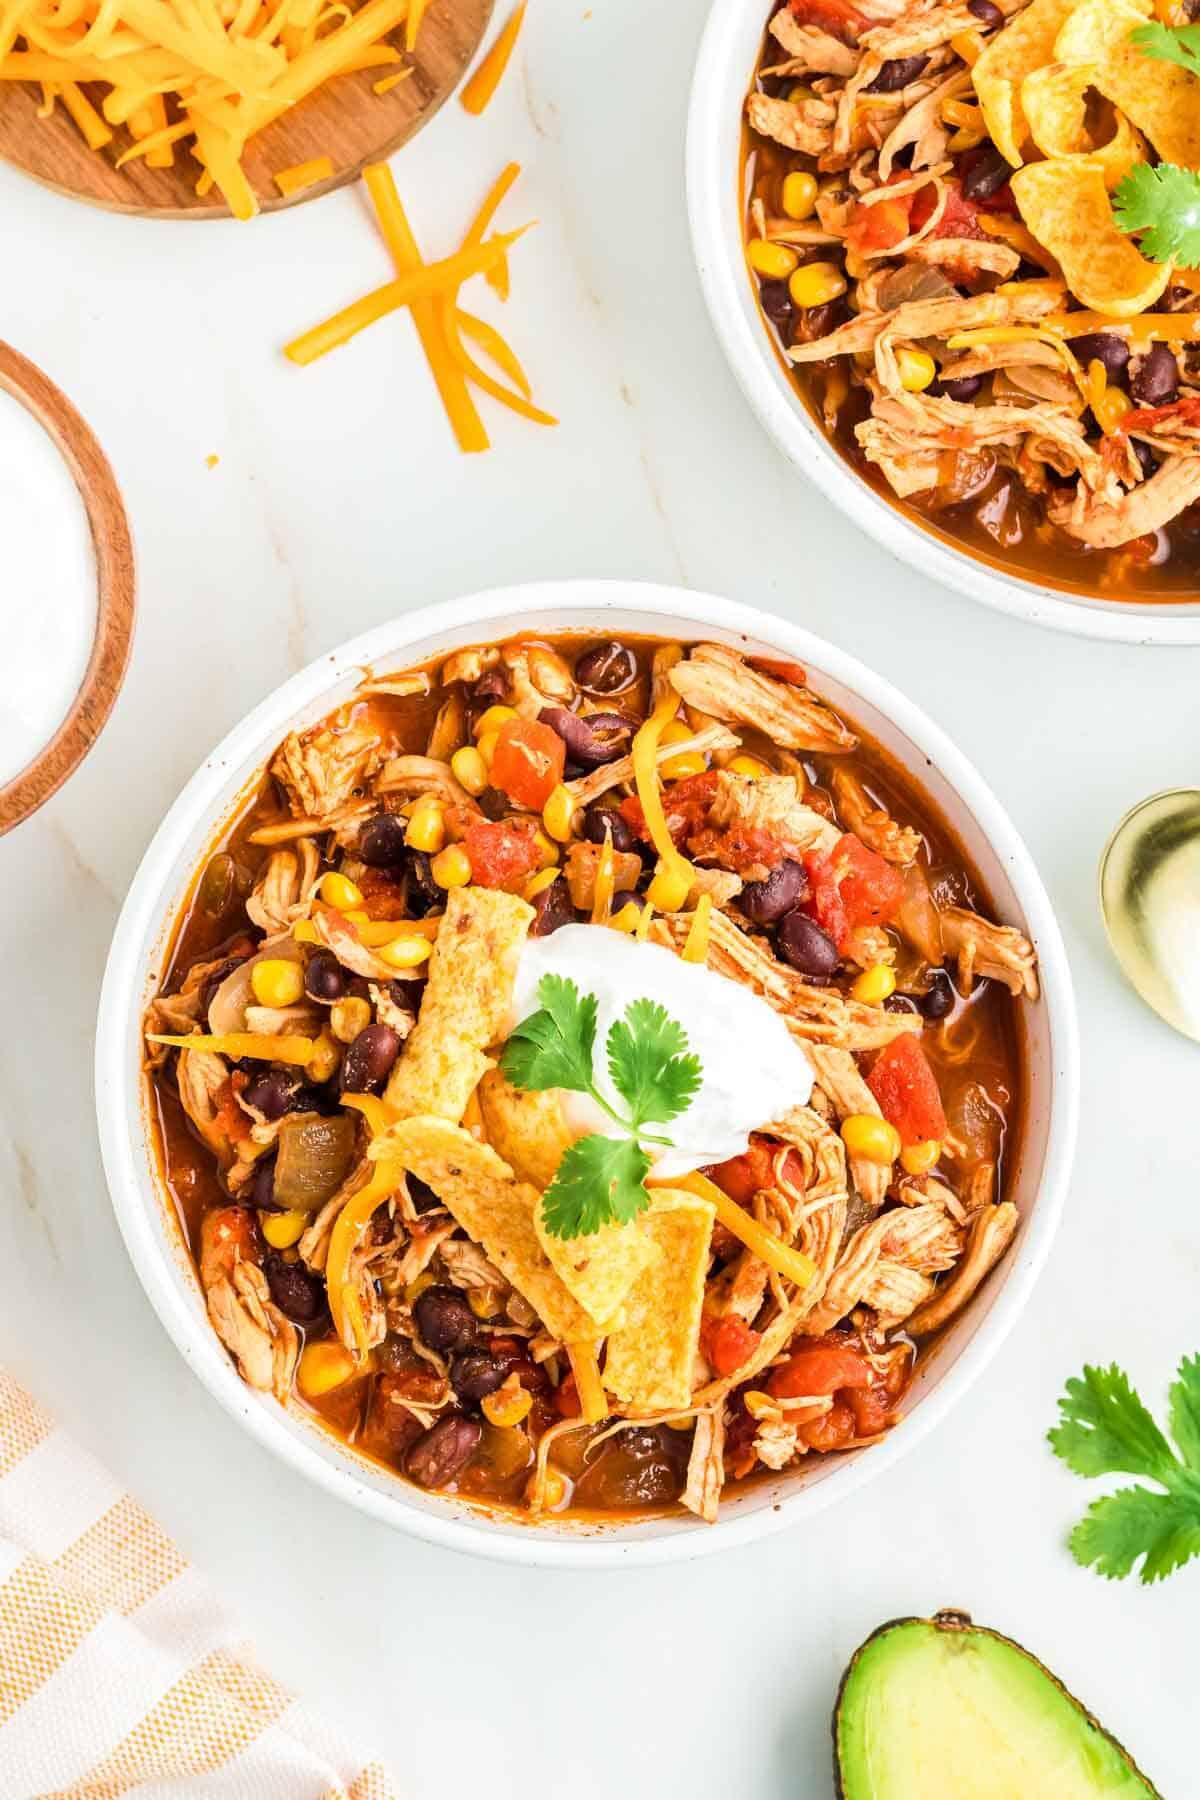 Red chicken chili made with shredded chicken in a bowl, with lots of chili toppings.